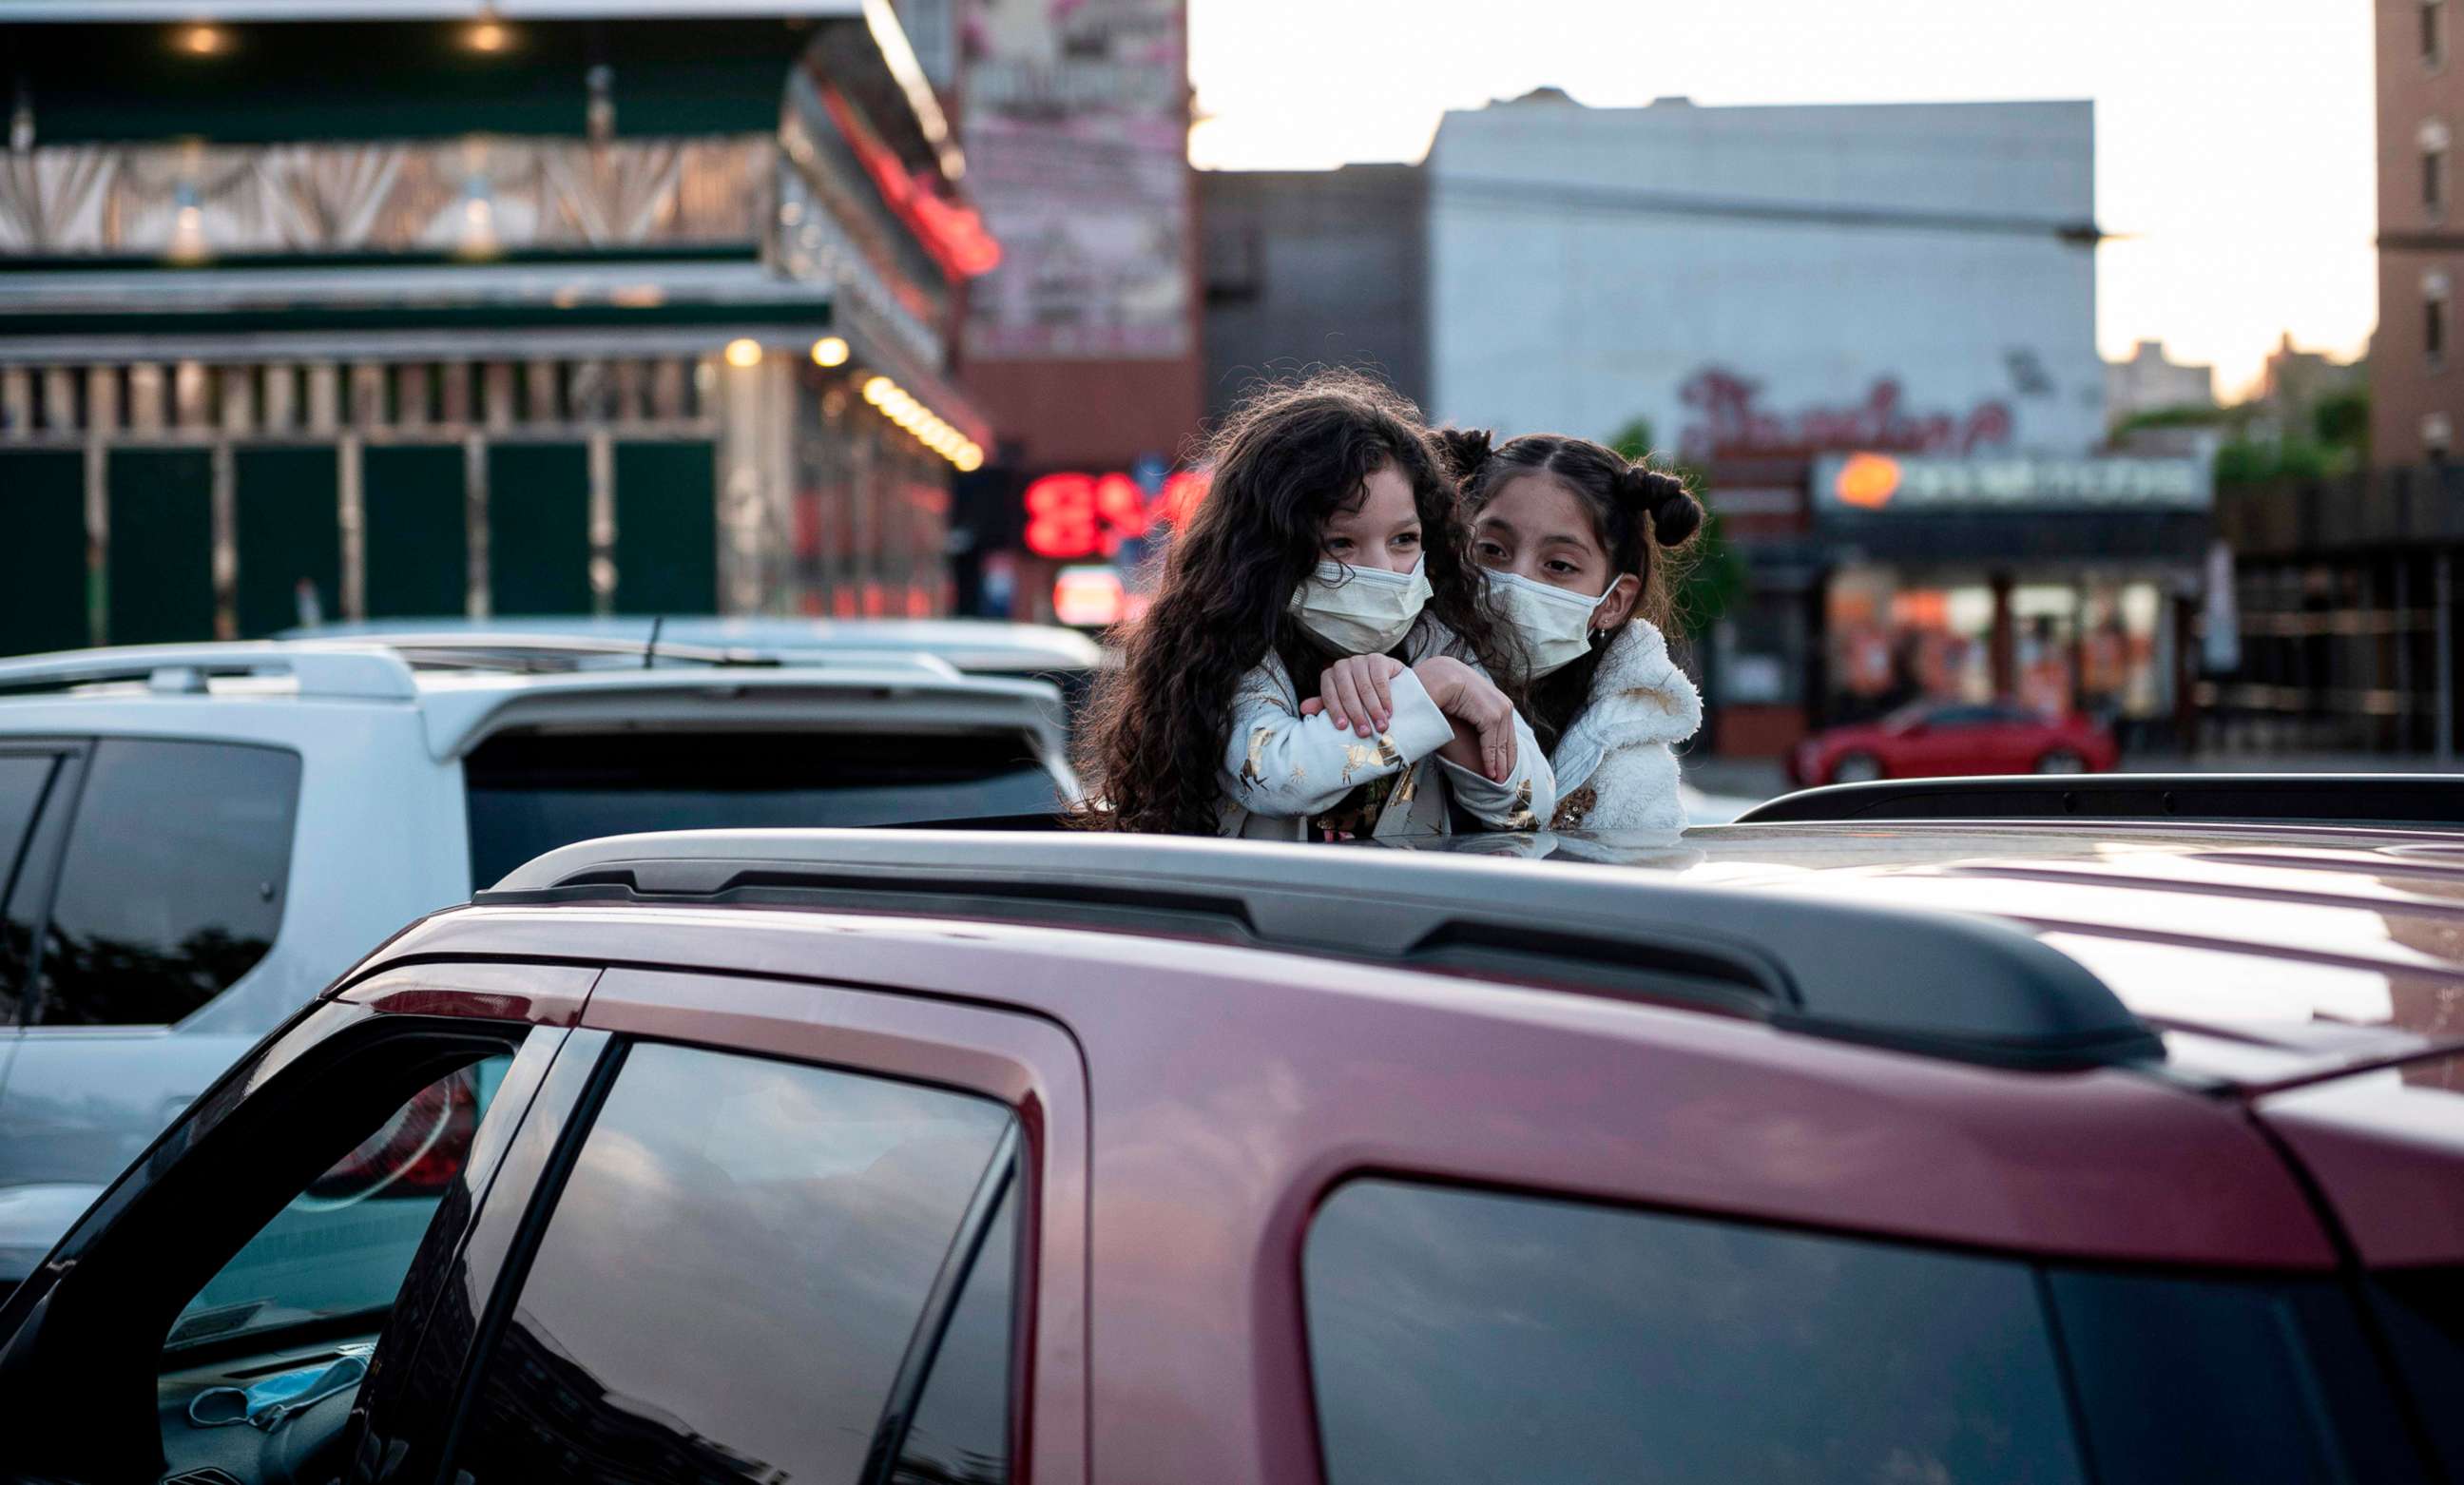 PHOTO: Two girls await a popup drive-in movie night at Bel Air Diner, May 20, 2020, in Queens, New York. The retro diner, which opened 1965, set up the drive-in cinema on its parking lot and shows movies once a week during the Covid-19 pandemic.